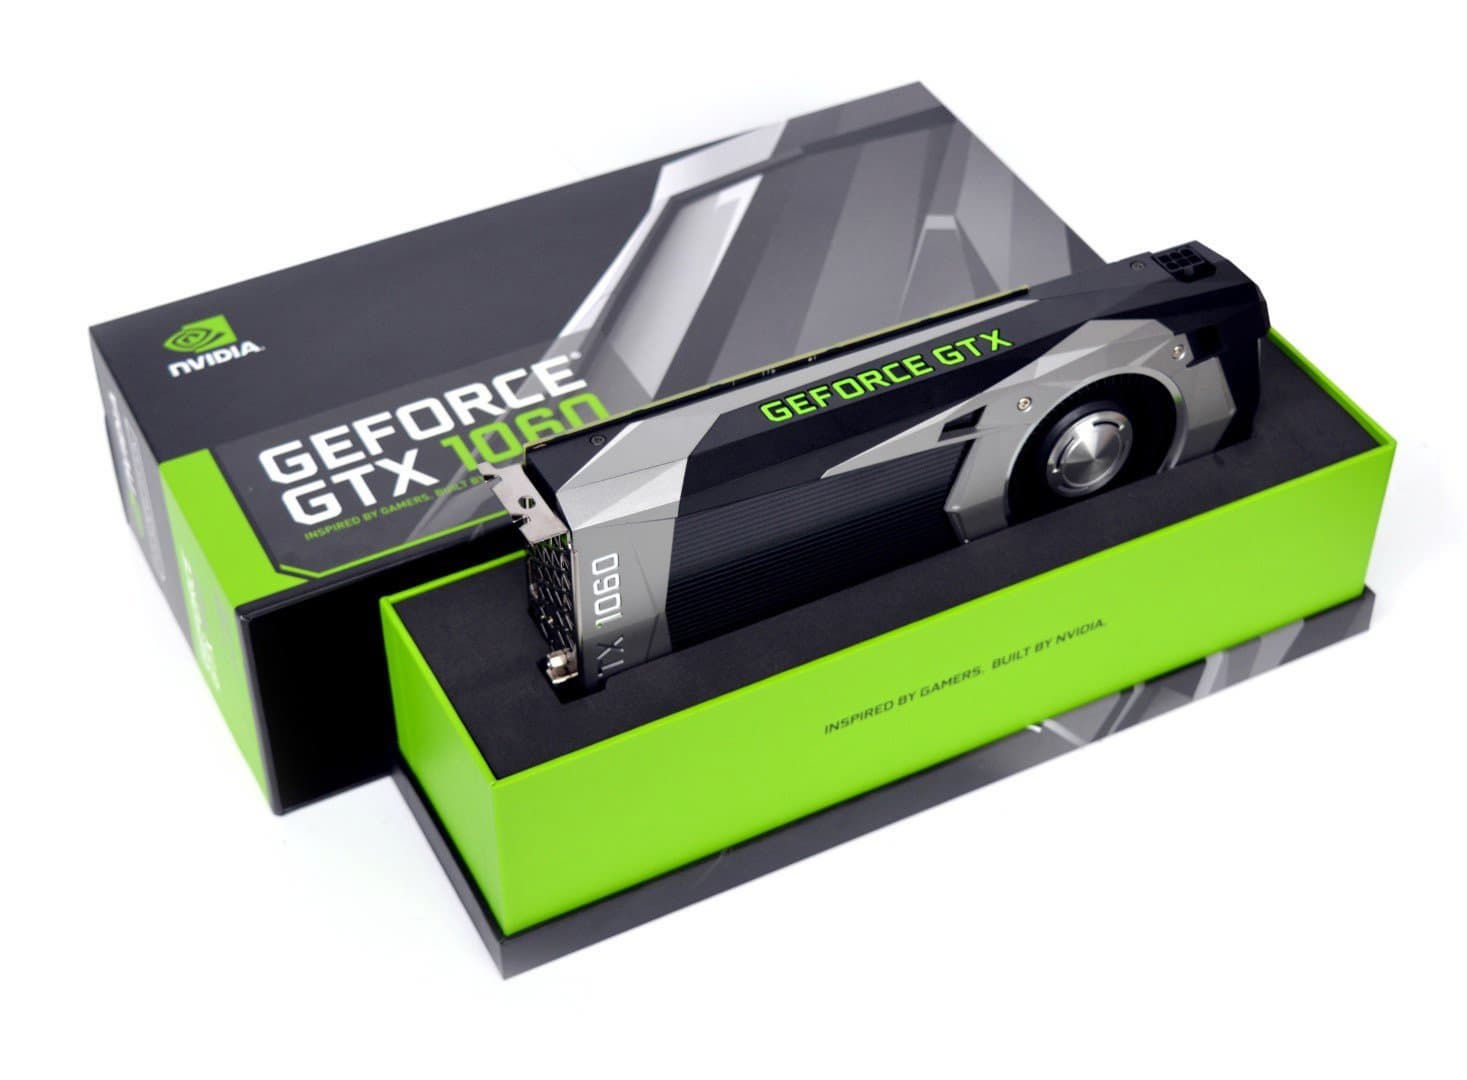 Nvidia GeForce GTX 1060 Founders Edition Graphics Card